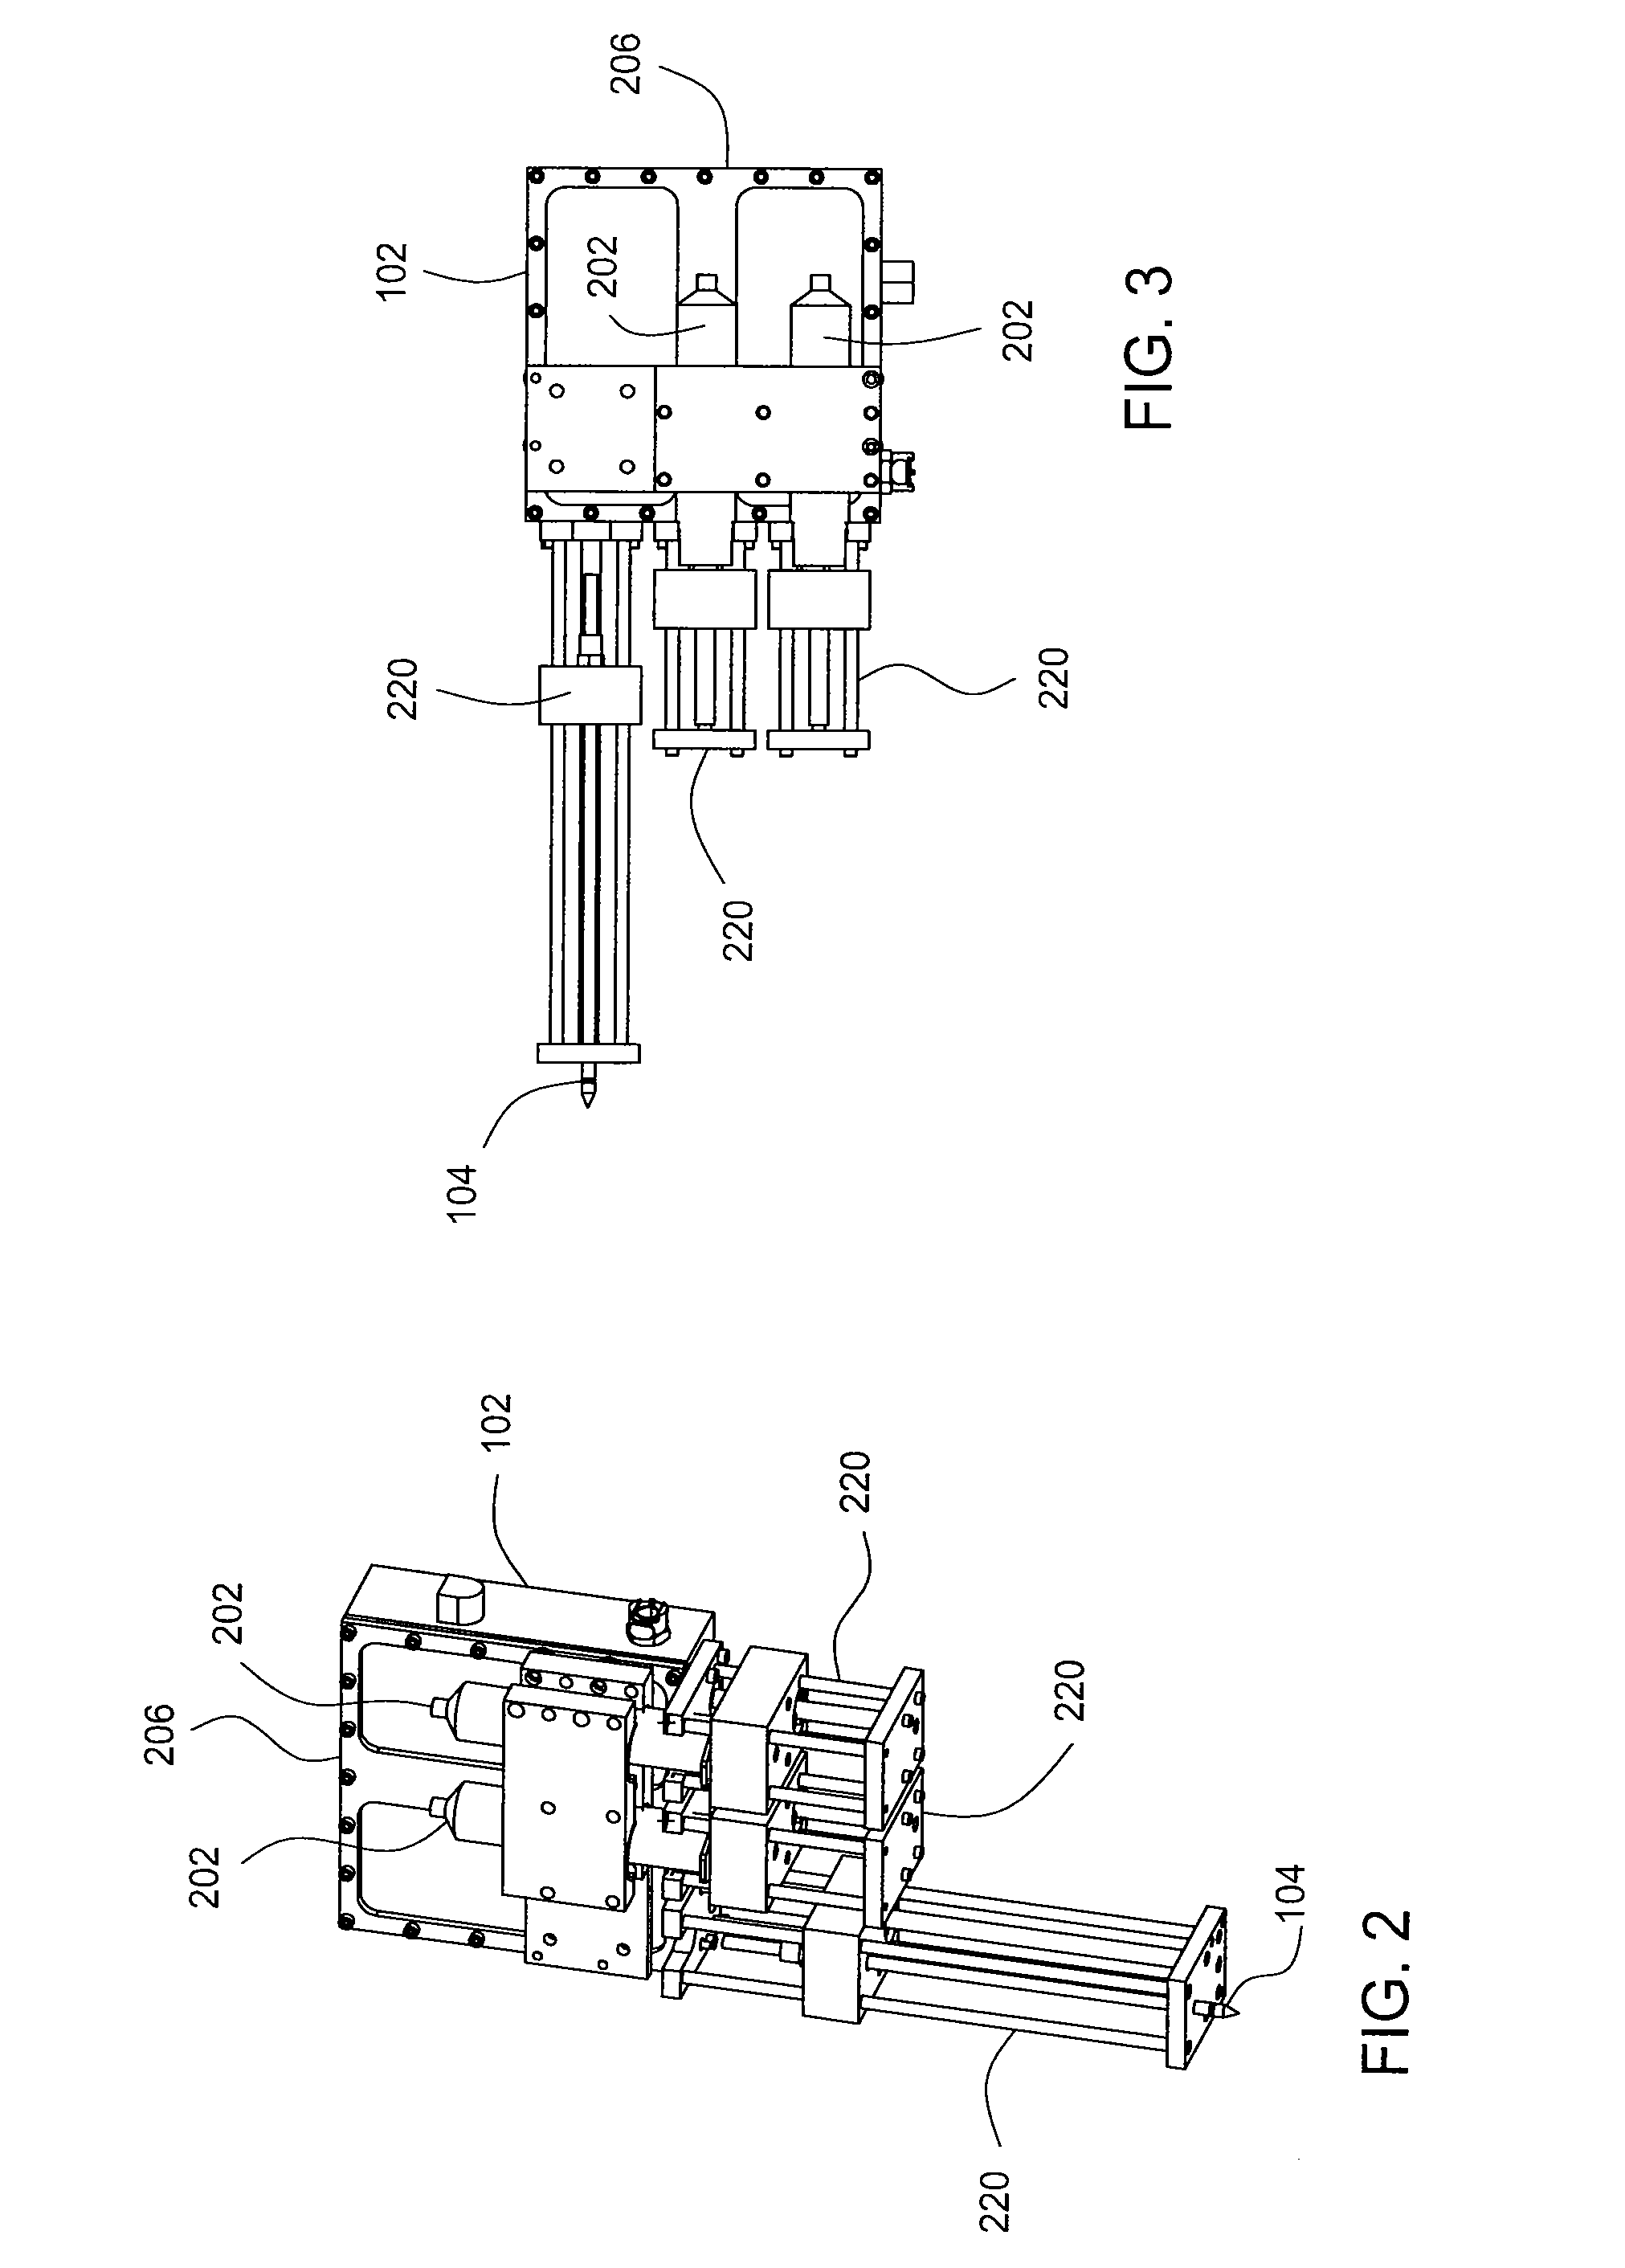 Method and apparatus for measuring multiple parameters in-situ of a sample collected from environmental systems